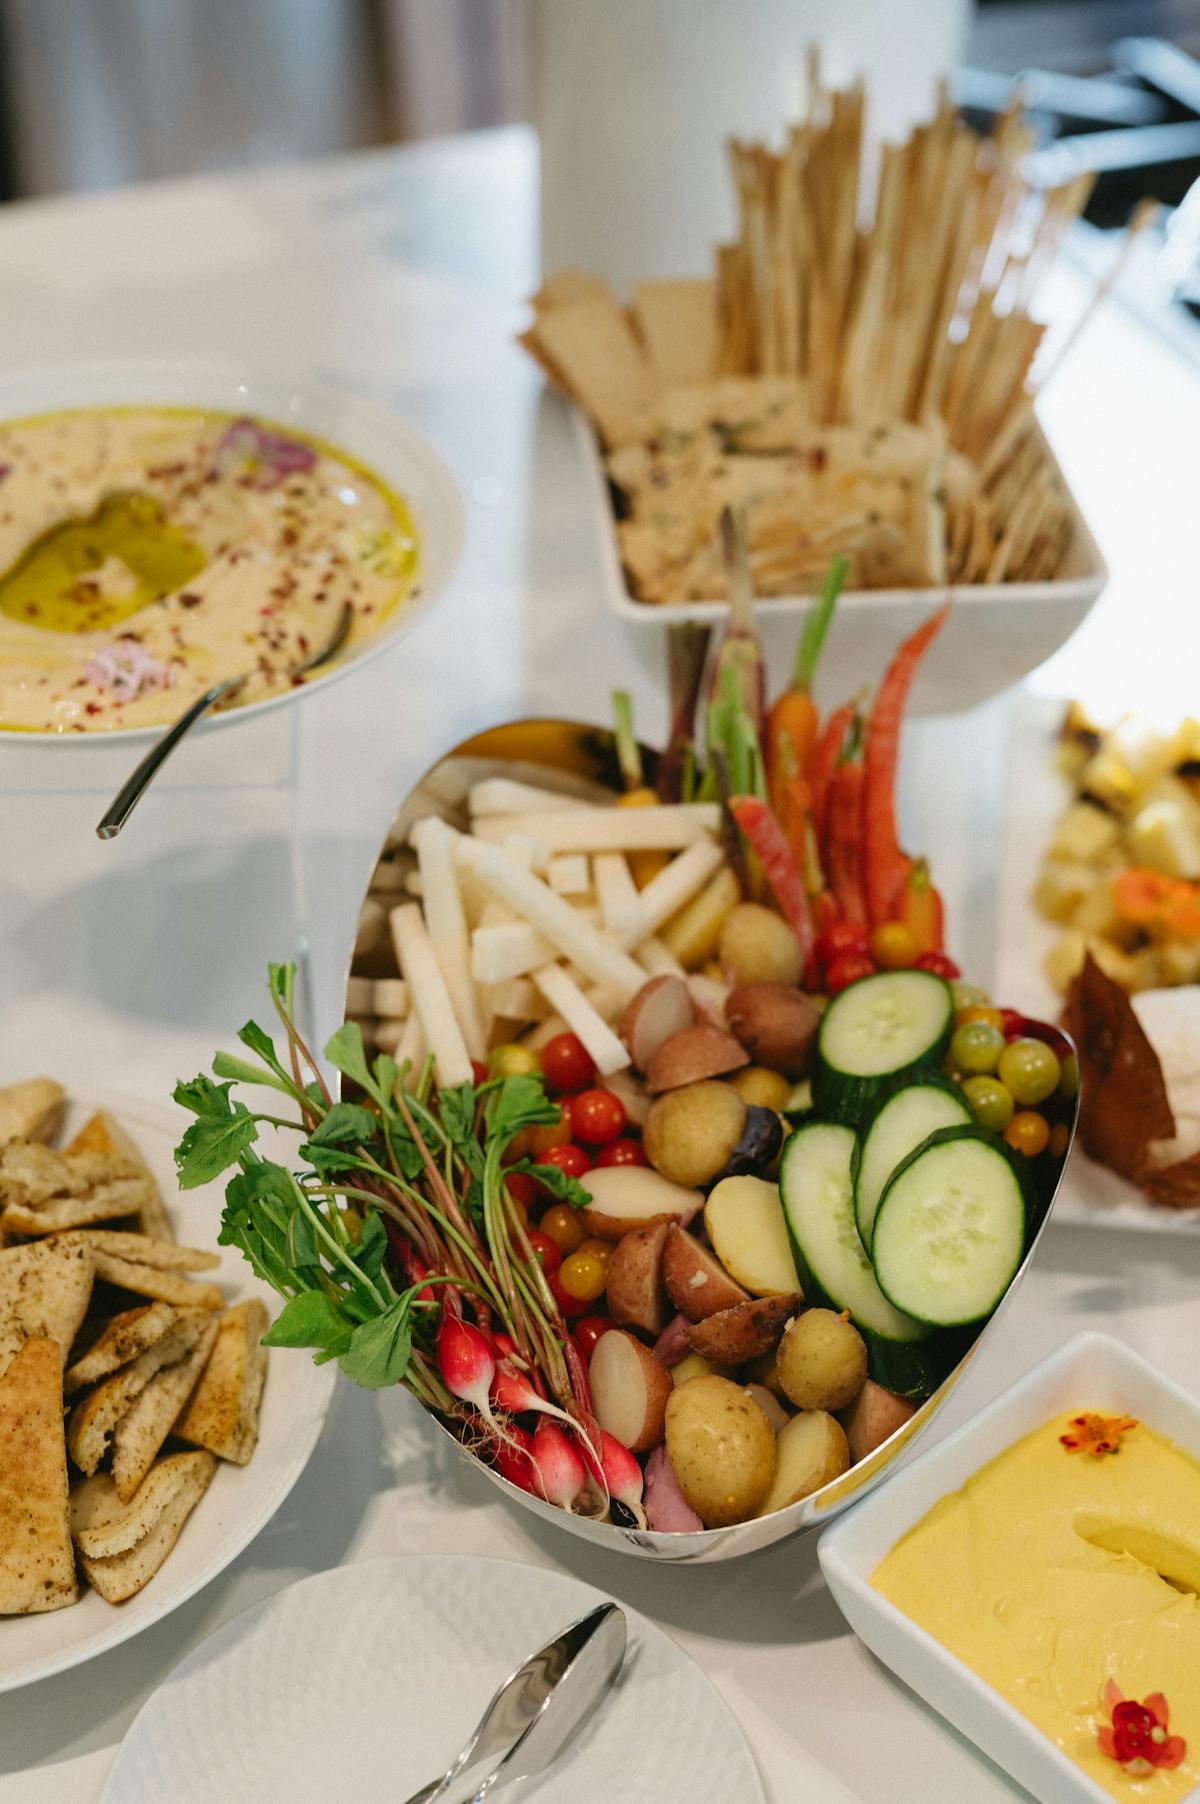 A tablespread of crudites and dips catered by Michelle Bernstein with hummus, breadsticks and cheese.